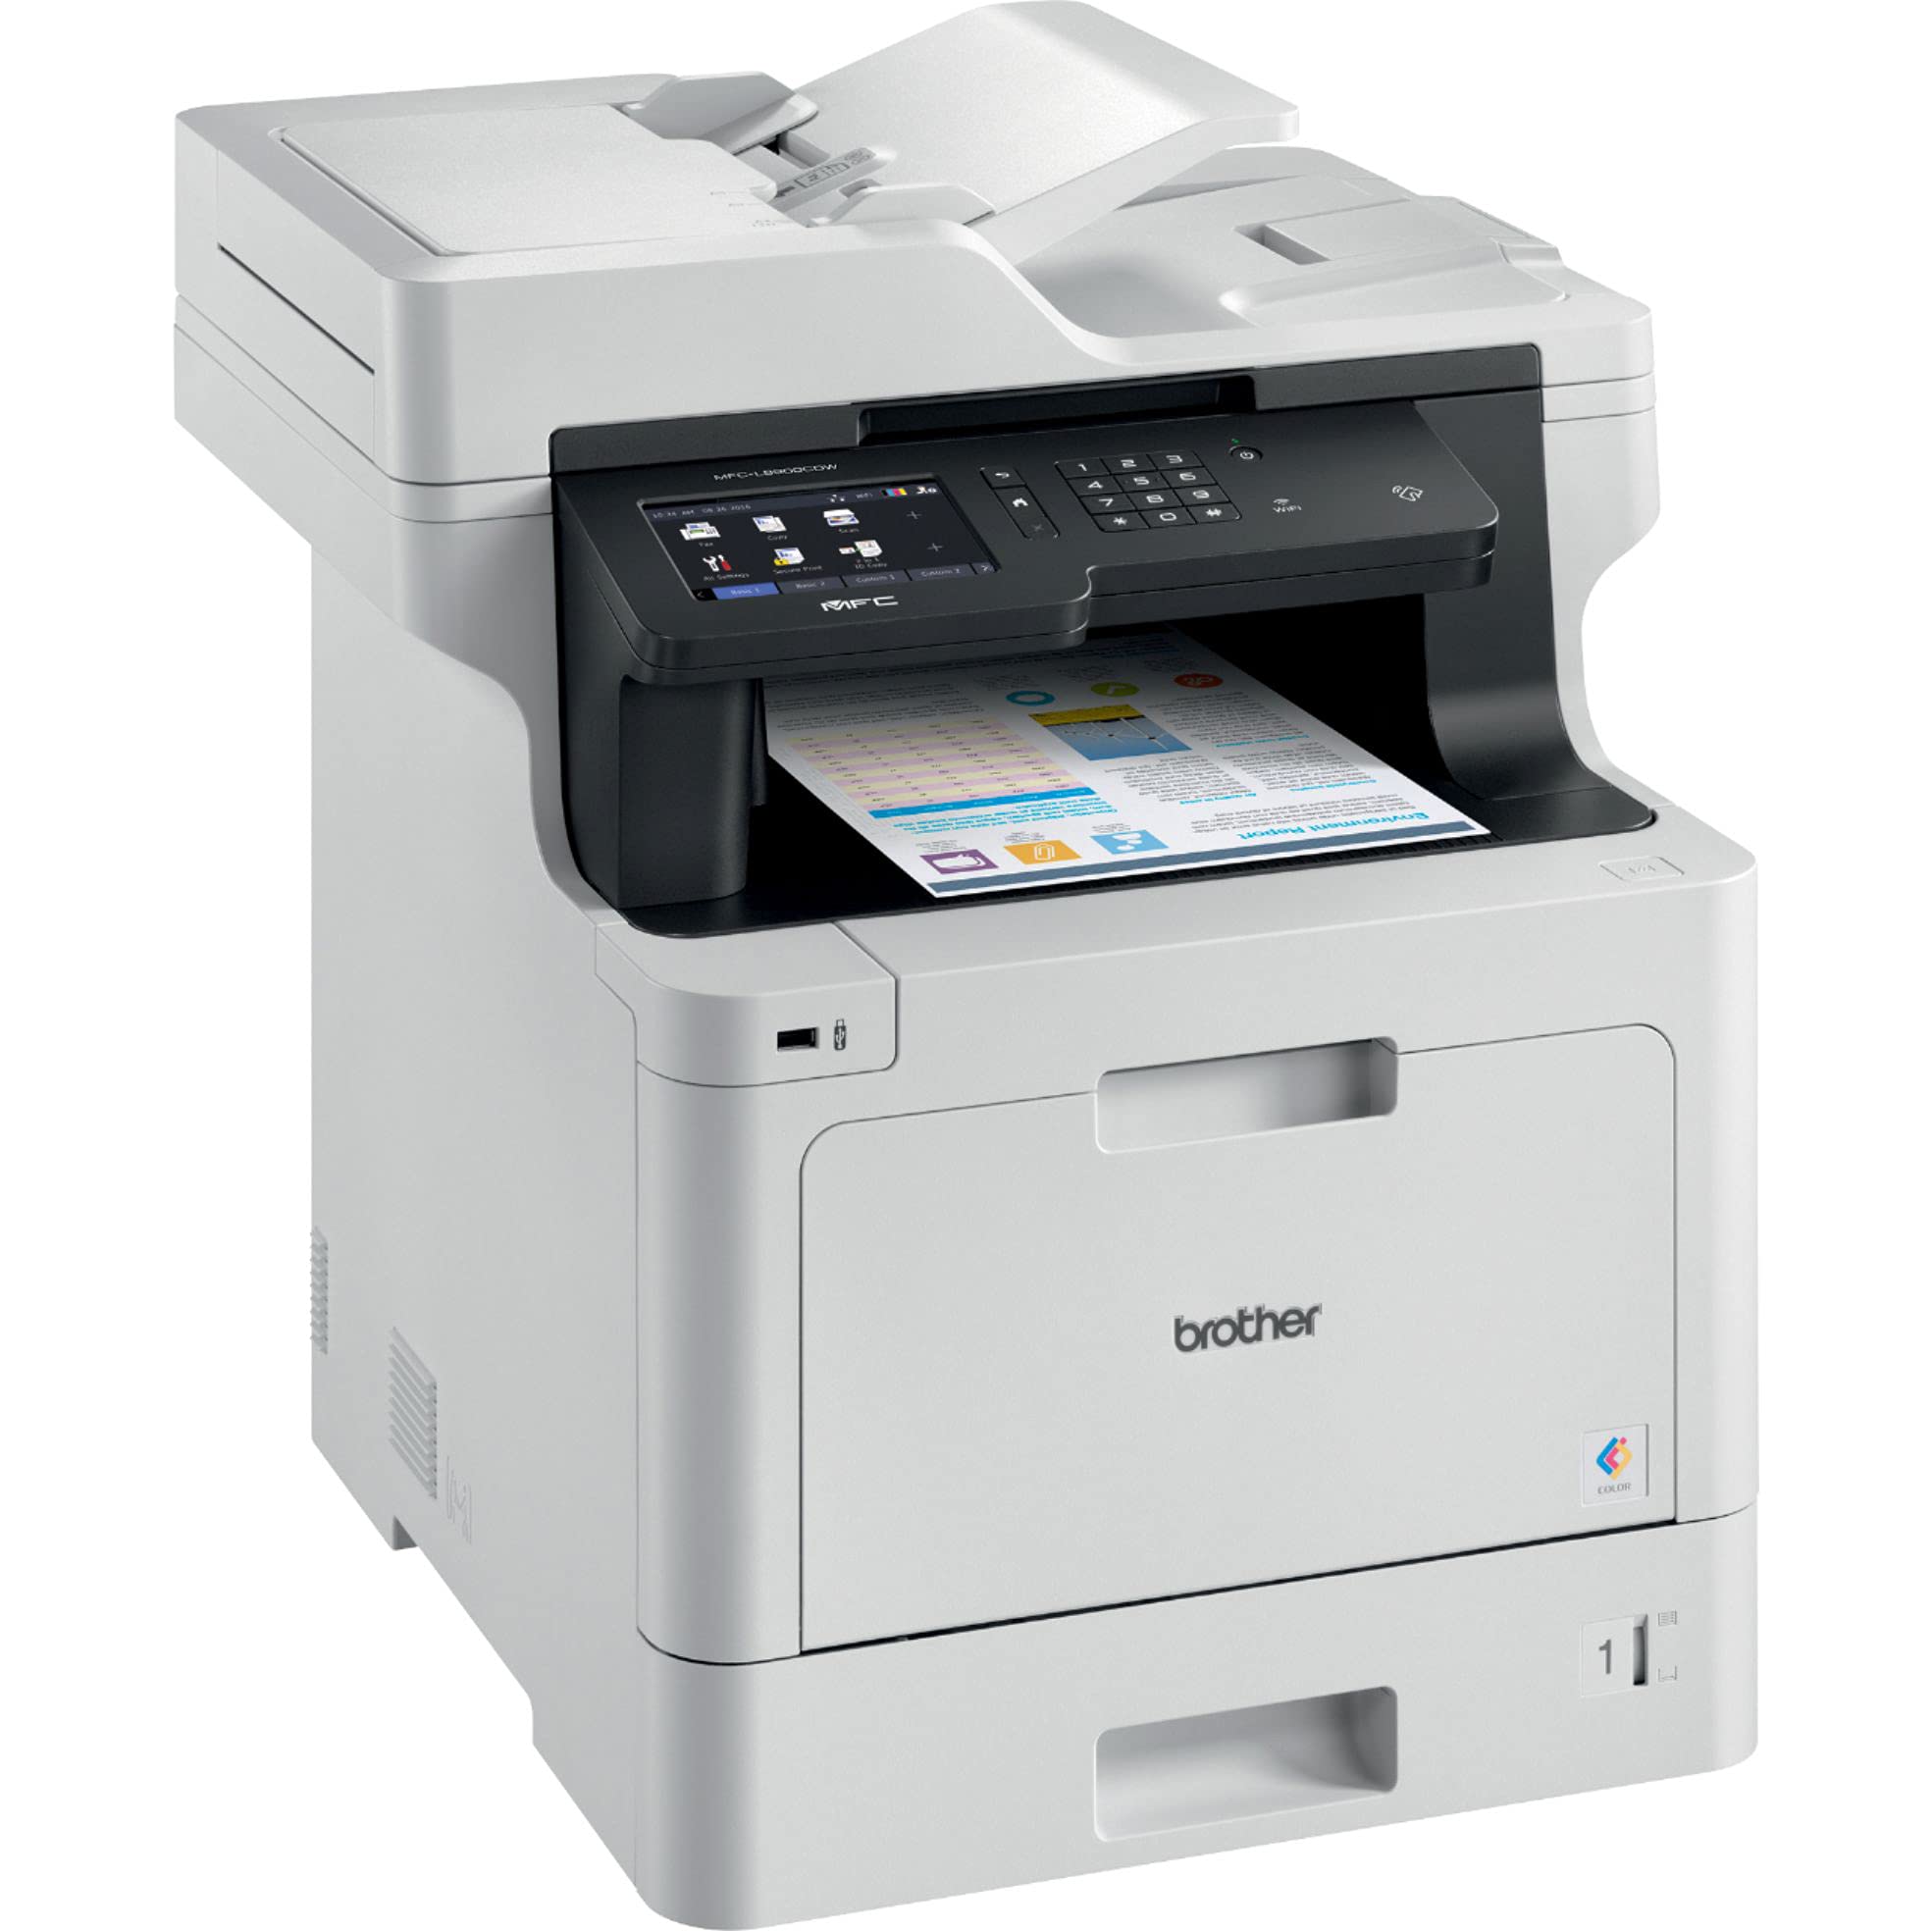 Brother MFC-L8900CDWB All-in-One Wireless Color Laser Printer for Office - 4-IN-1 Print Copy Scan Fax - 5